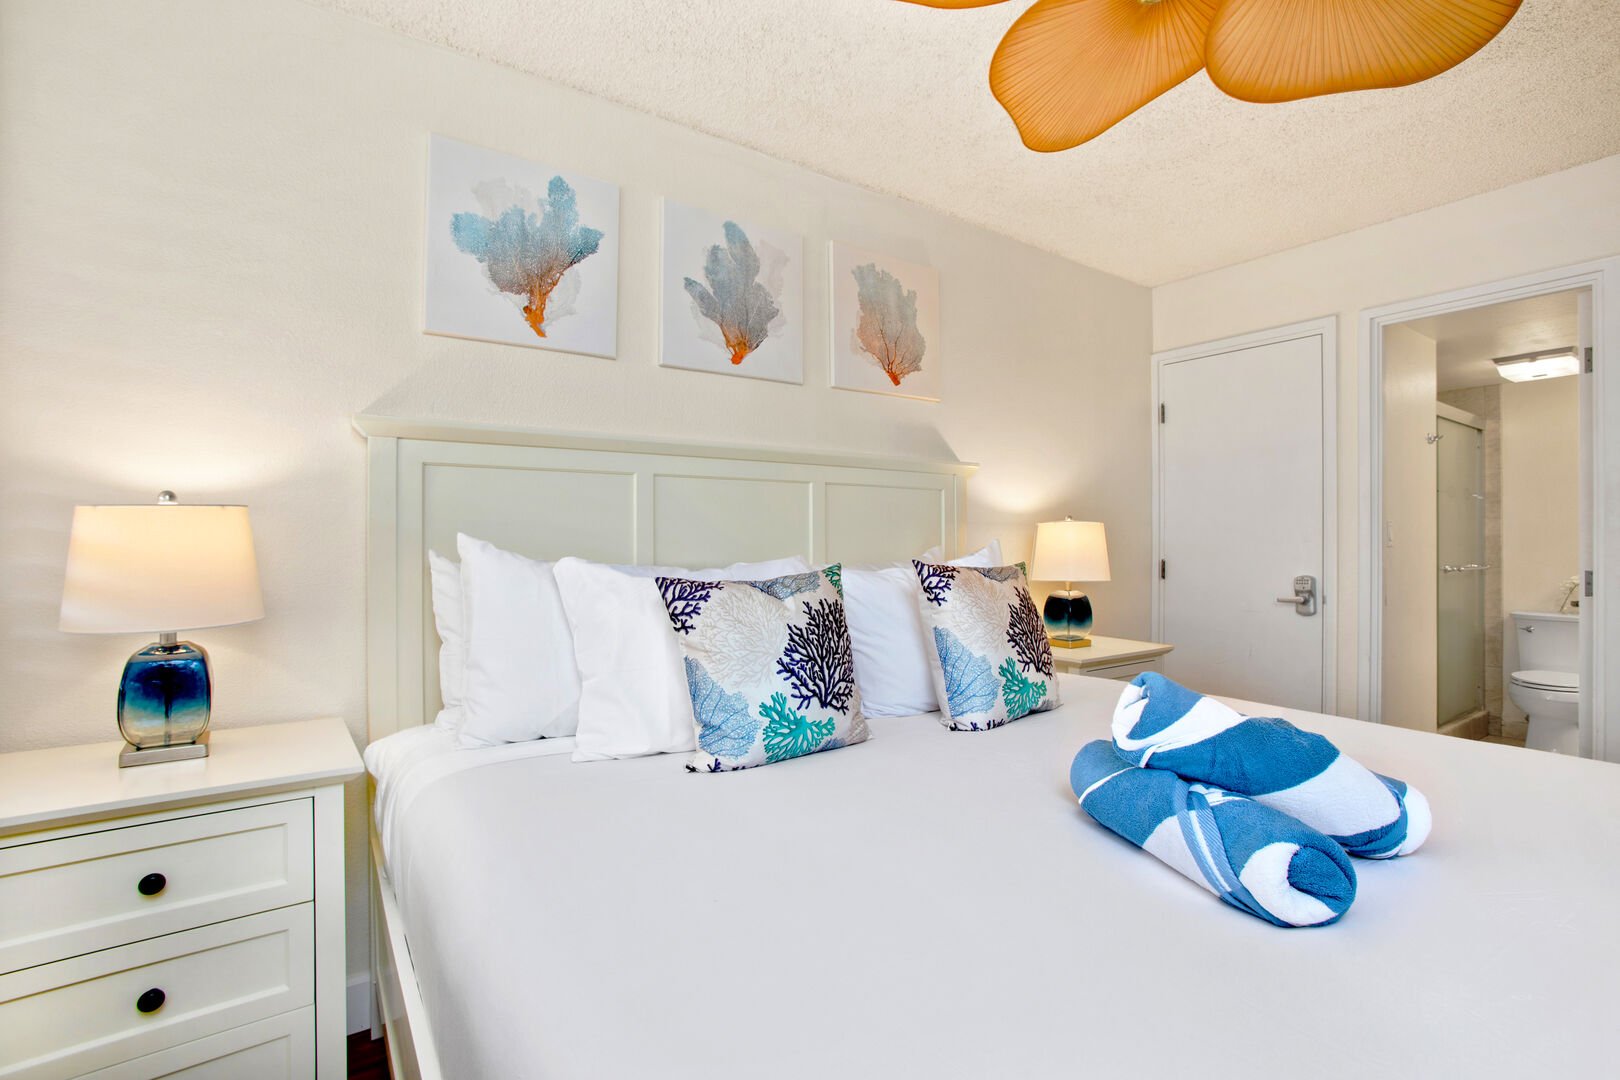 Have a restful night's sleep in this king-size bed in the bedroom!